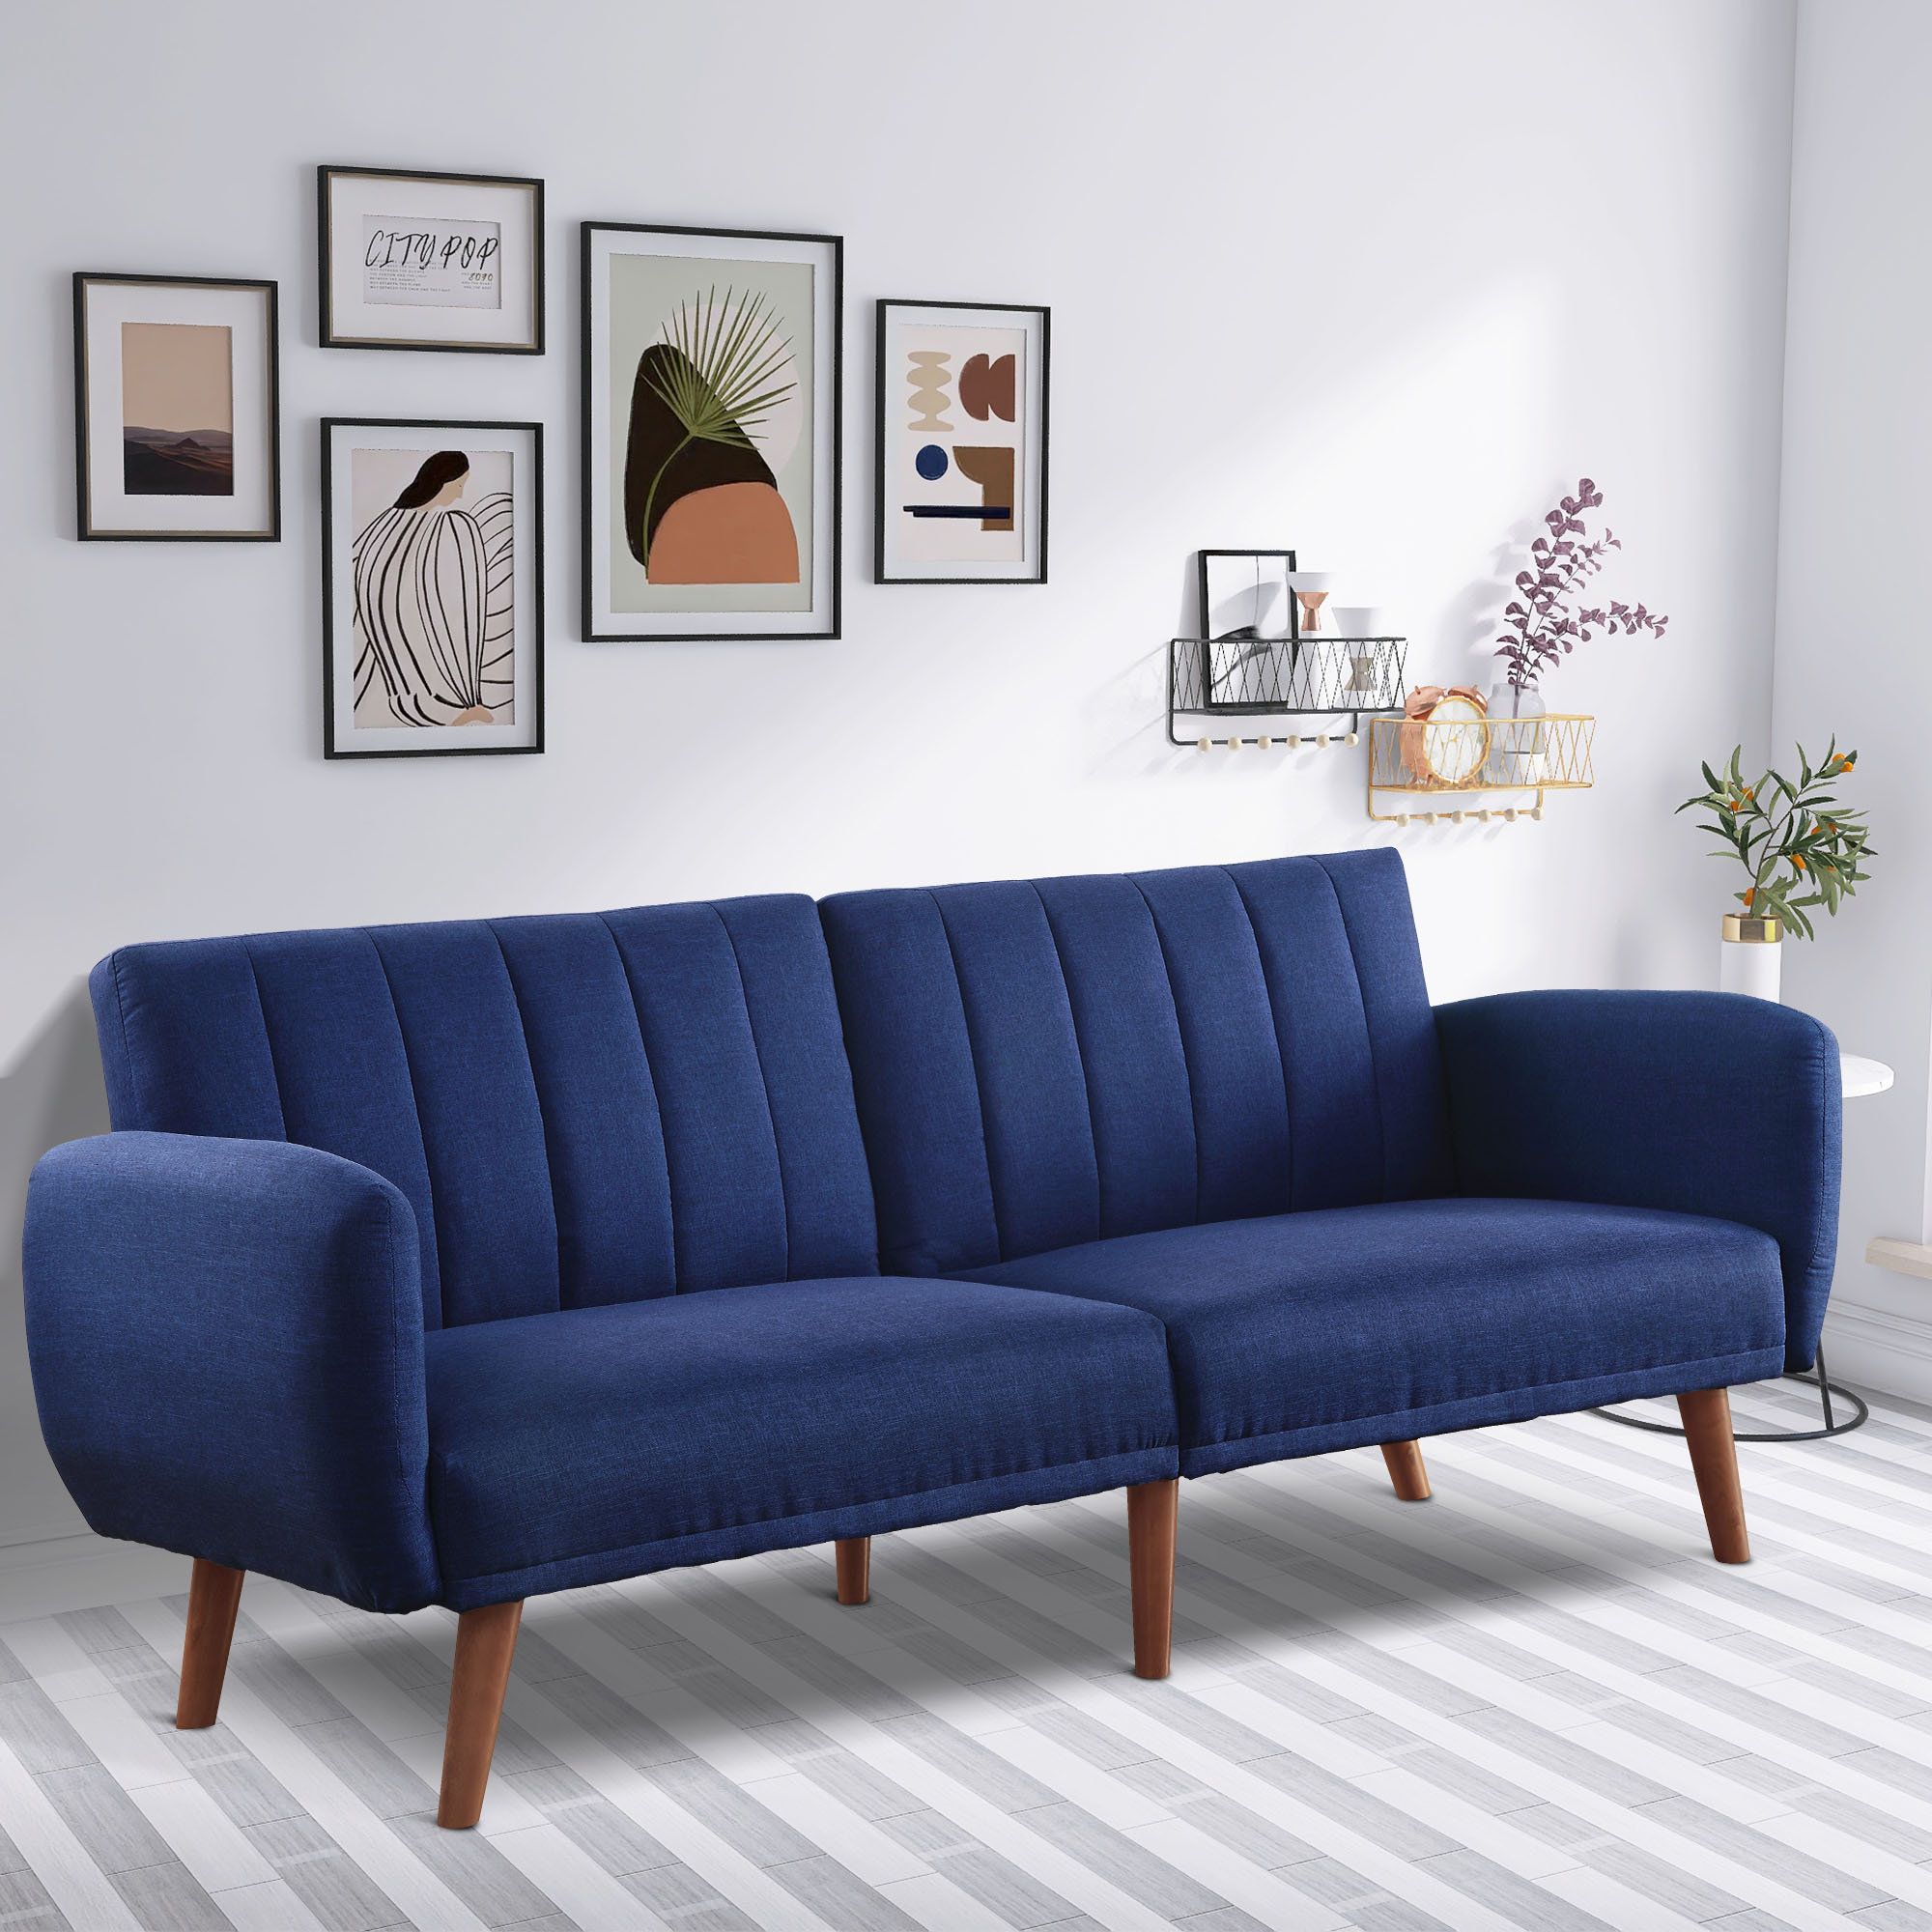 Wade Logan® Argene 76" Upholstered Tight Back Convertible Sofa | Wayfair With Regard To Navy Linen Coil Sofas (View 9 of 15)